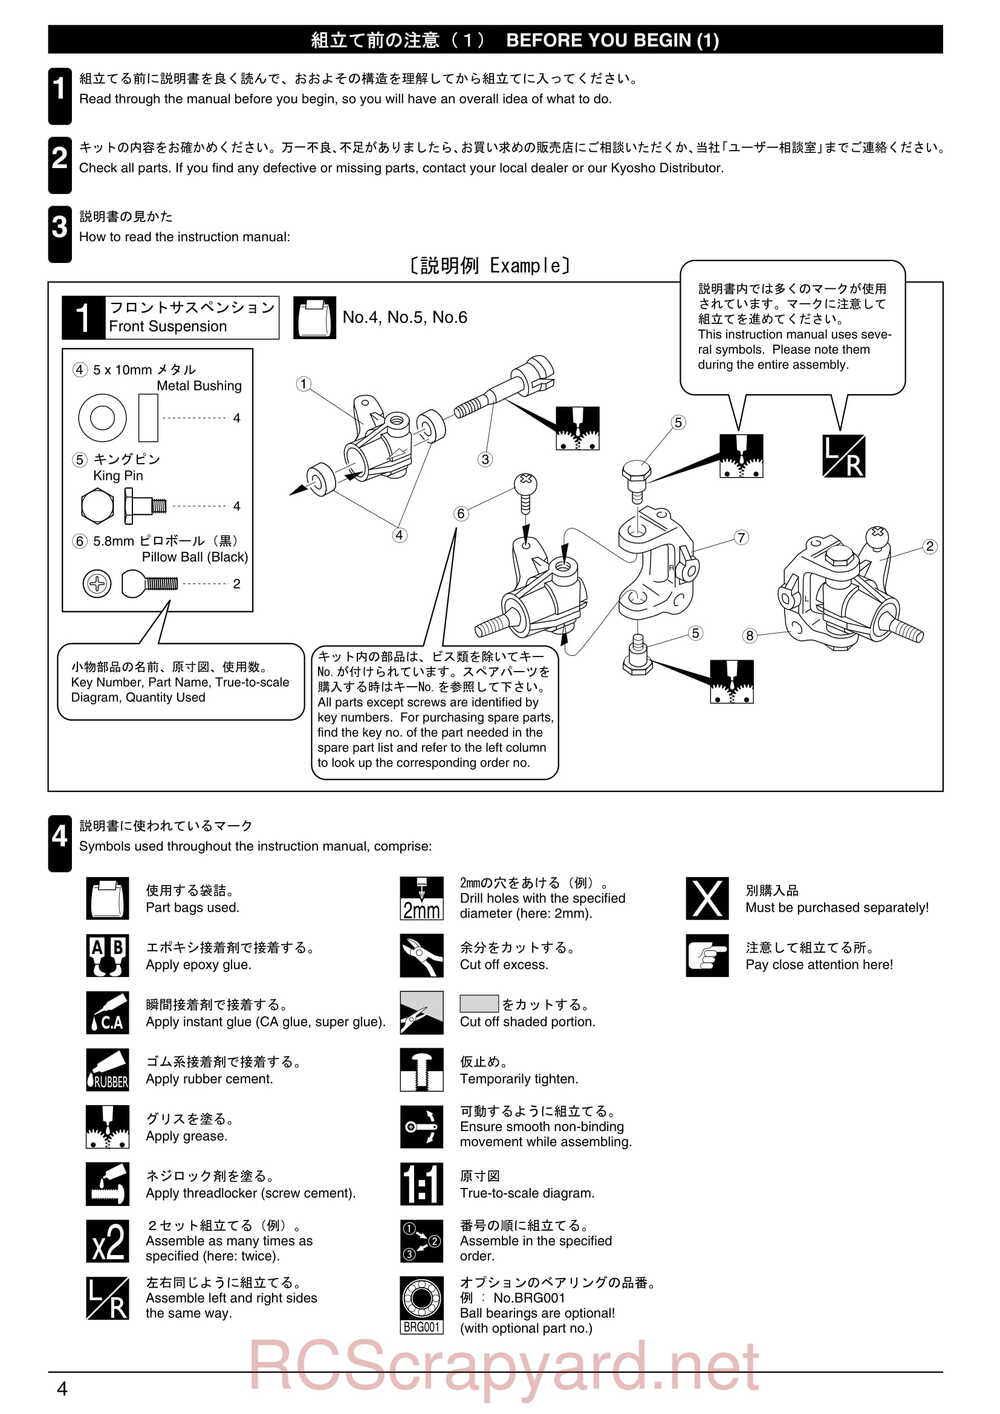 Kyosho - 31091 - Inferno-TR15 - Manual - Page 04